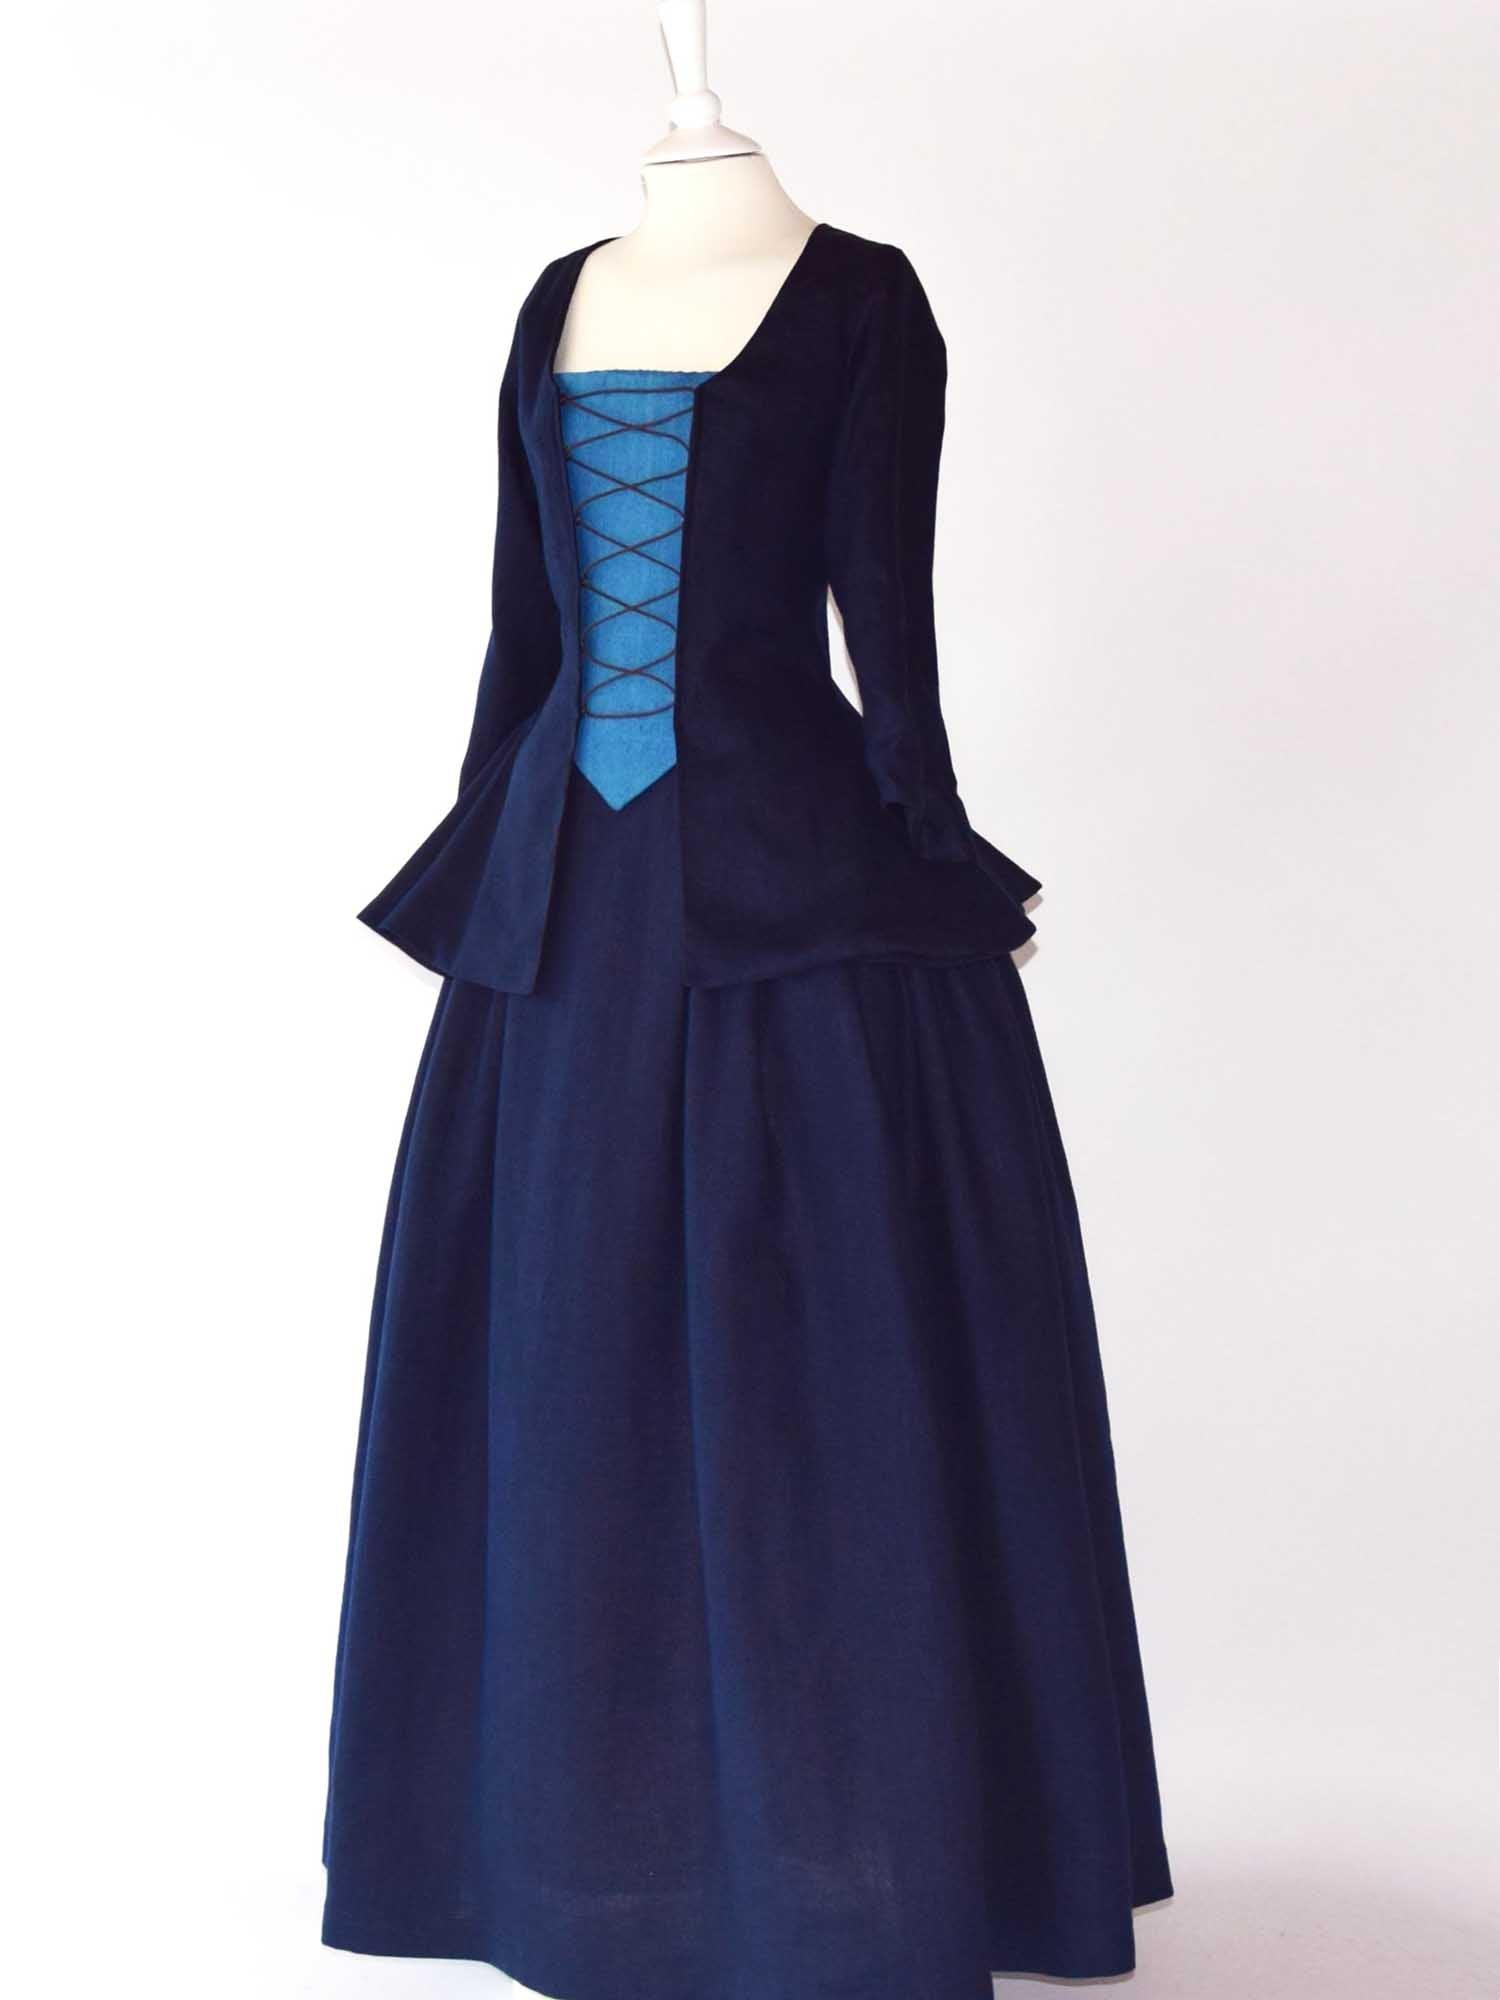 JANET, Colonial Costume in Night Blue Linen - Atelier Serraspina